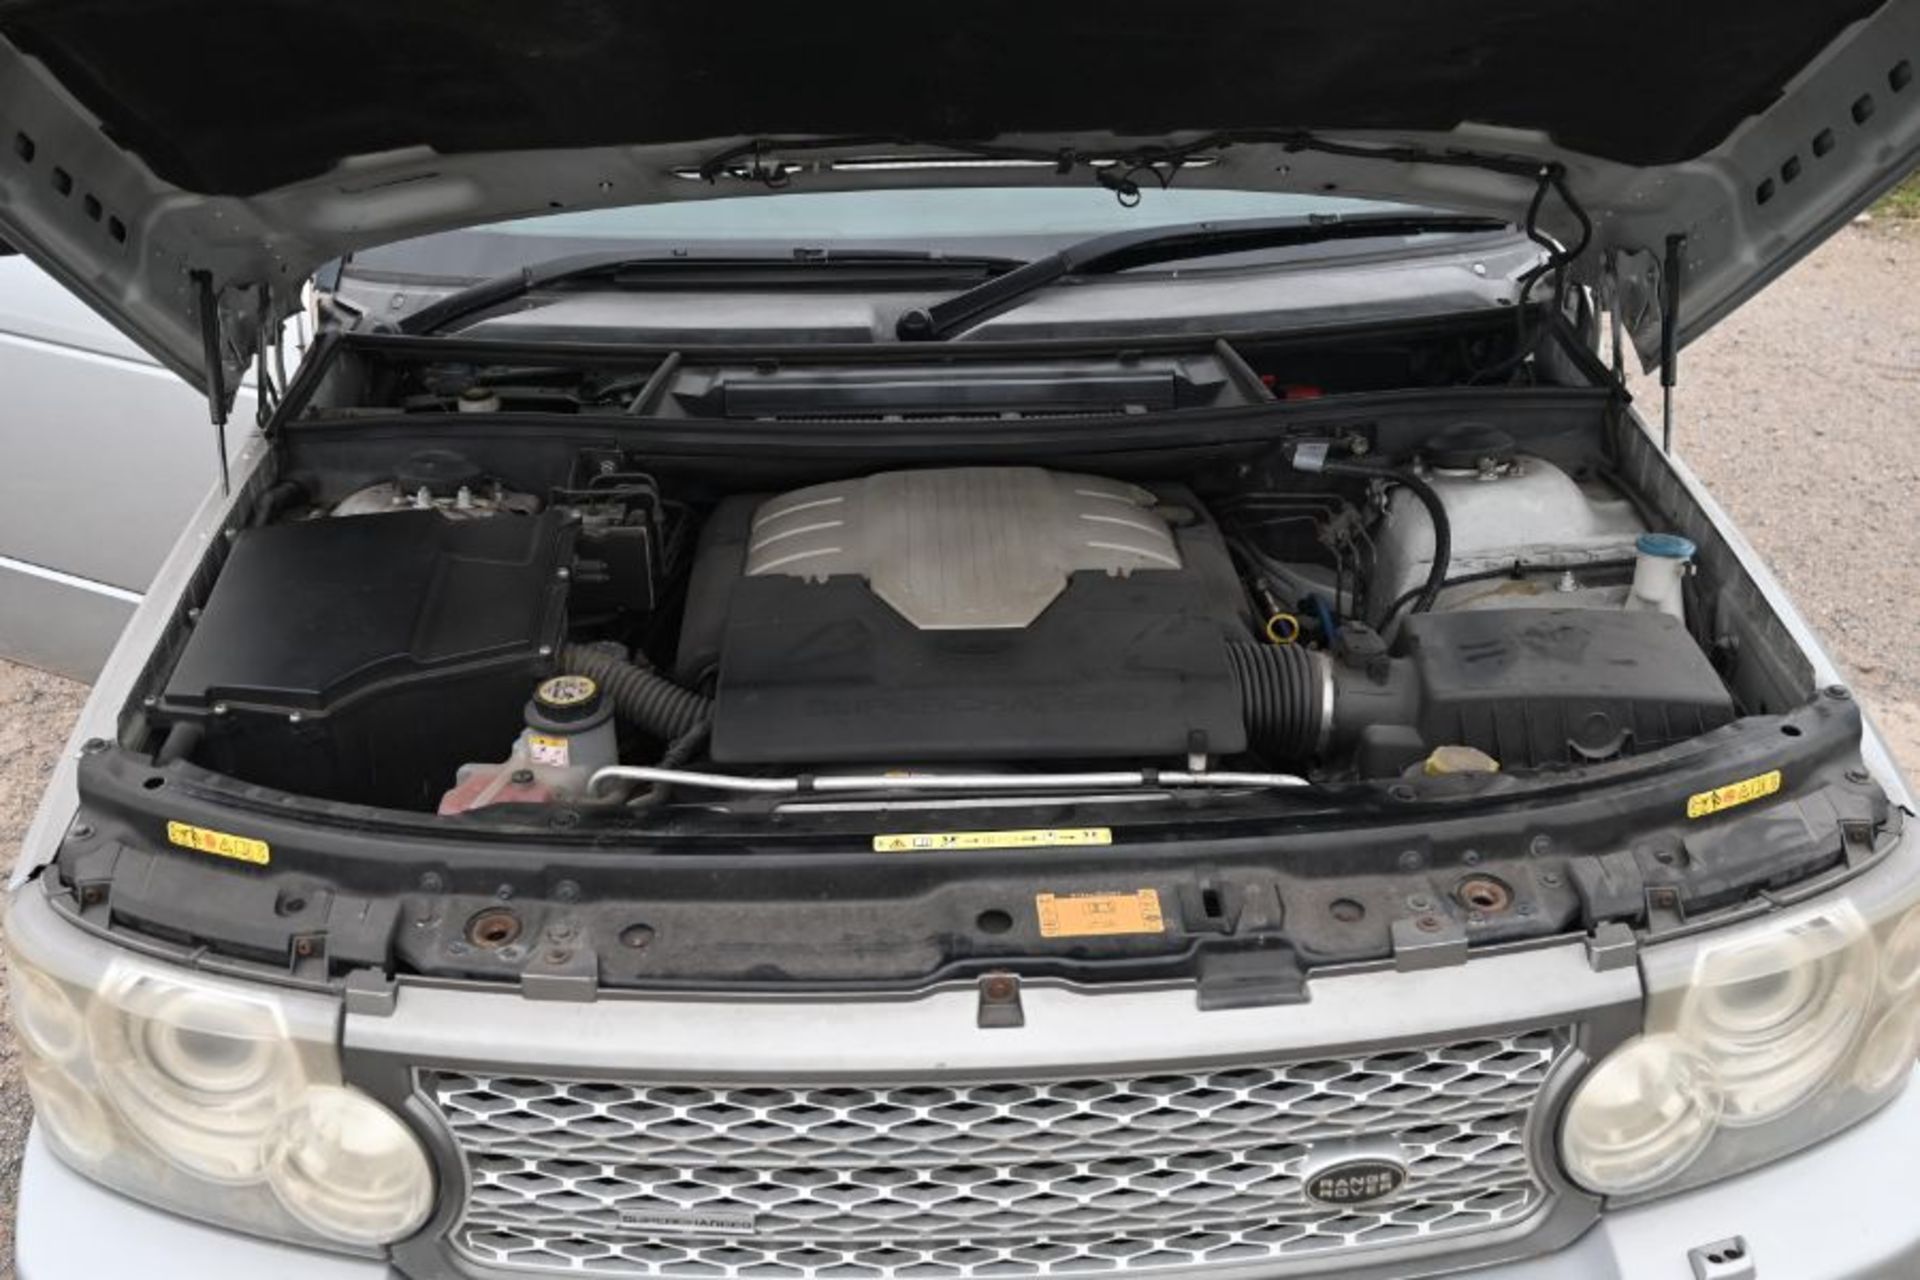 2006 Range Rover Supercharged V8. This Generation 2 L322 V8 Supercharged was collected by - Image 34 of 37